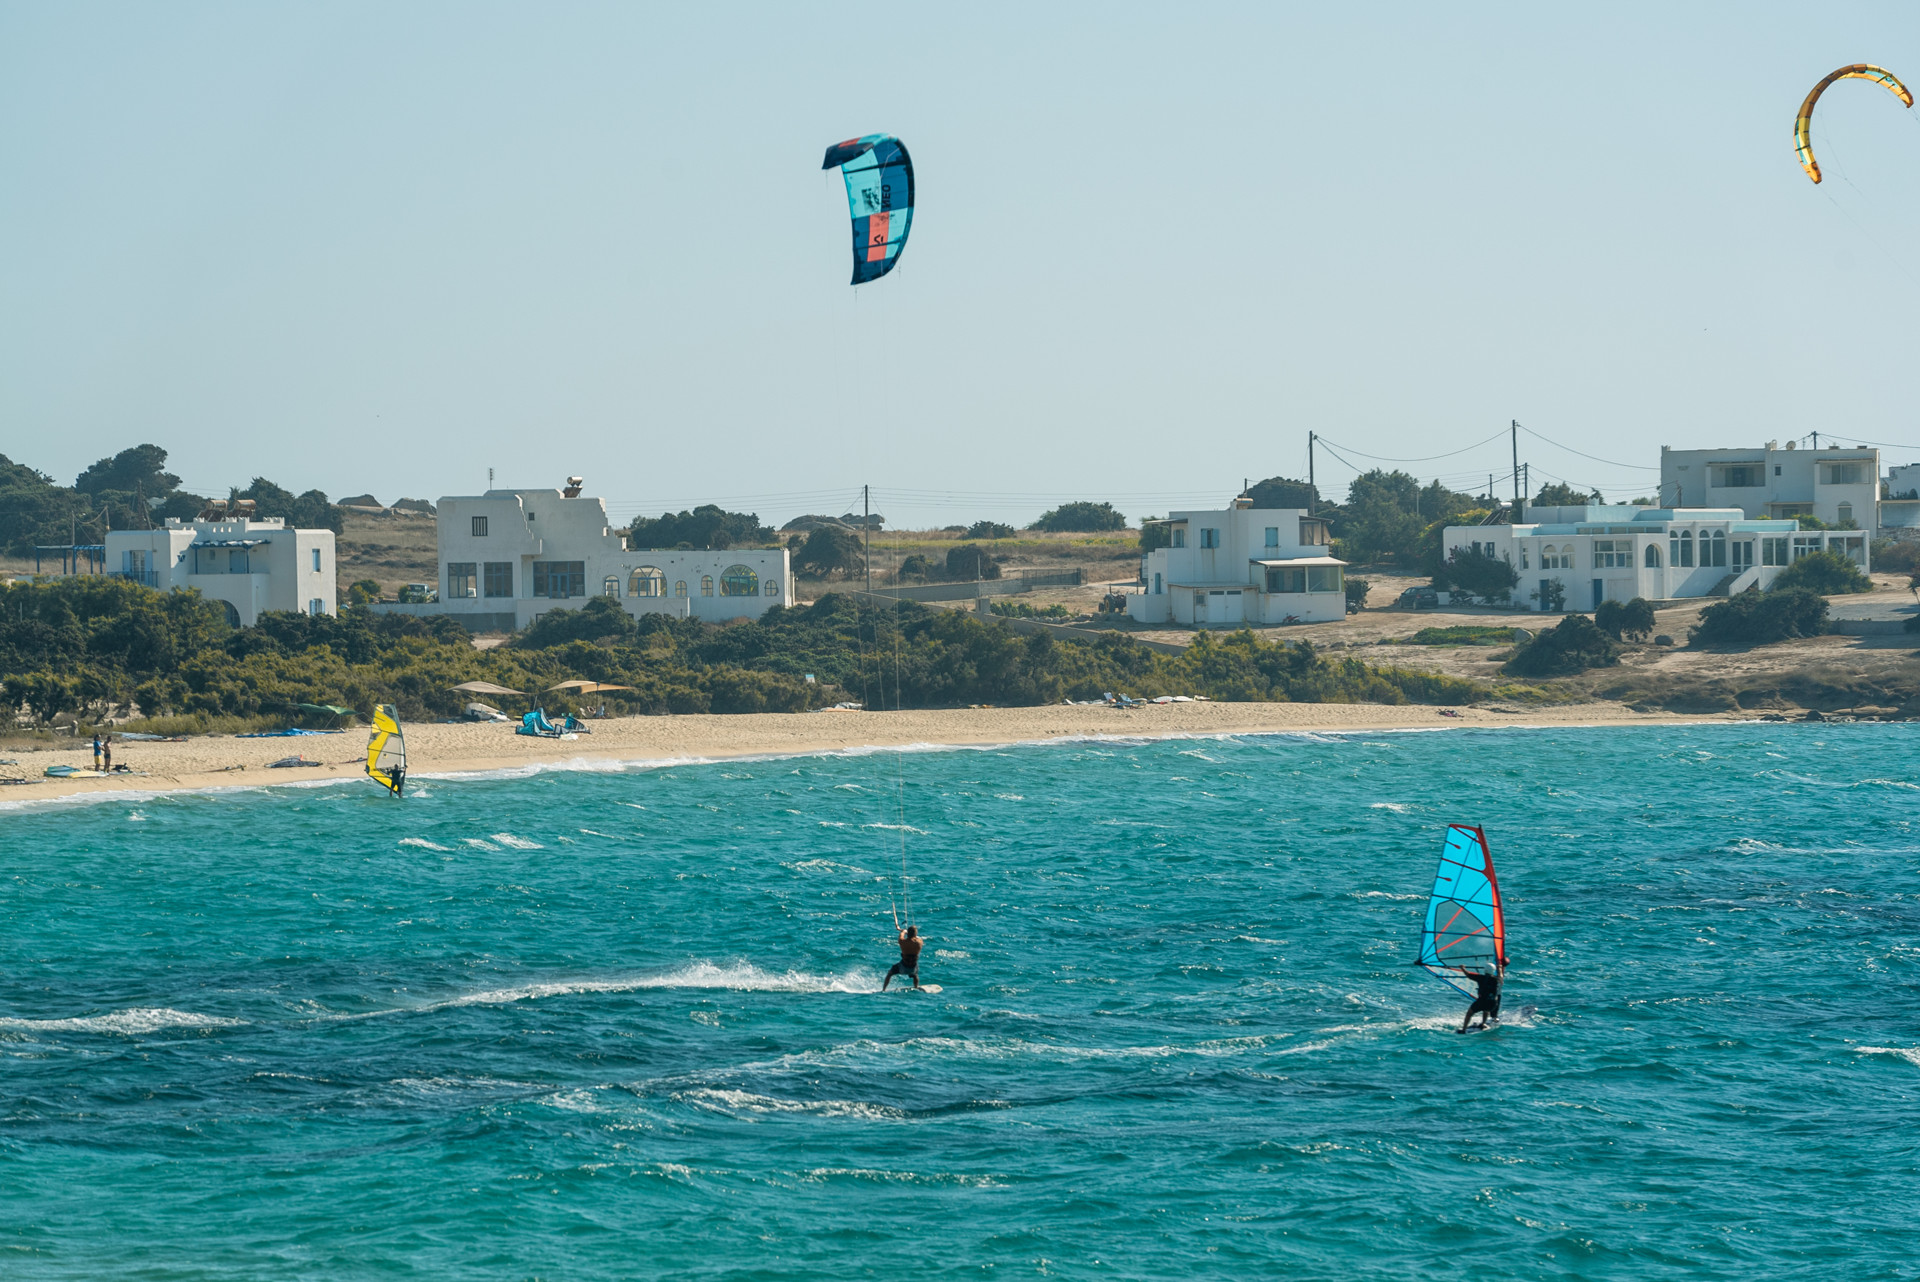 The wind conditions at Plaka beach make it a magnet for windsurfers and kitesurfers